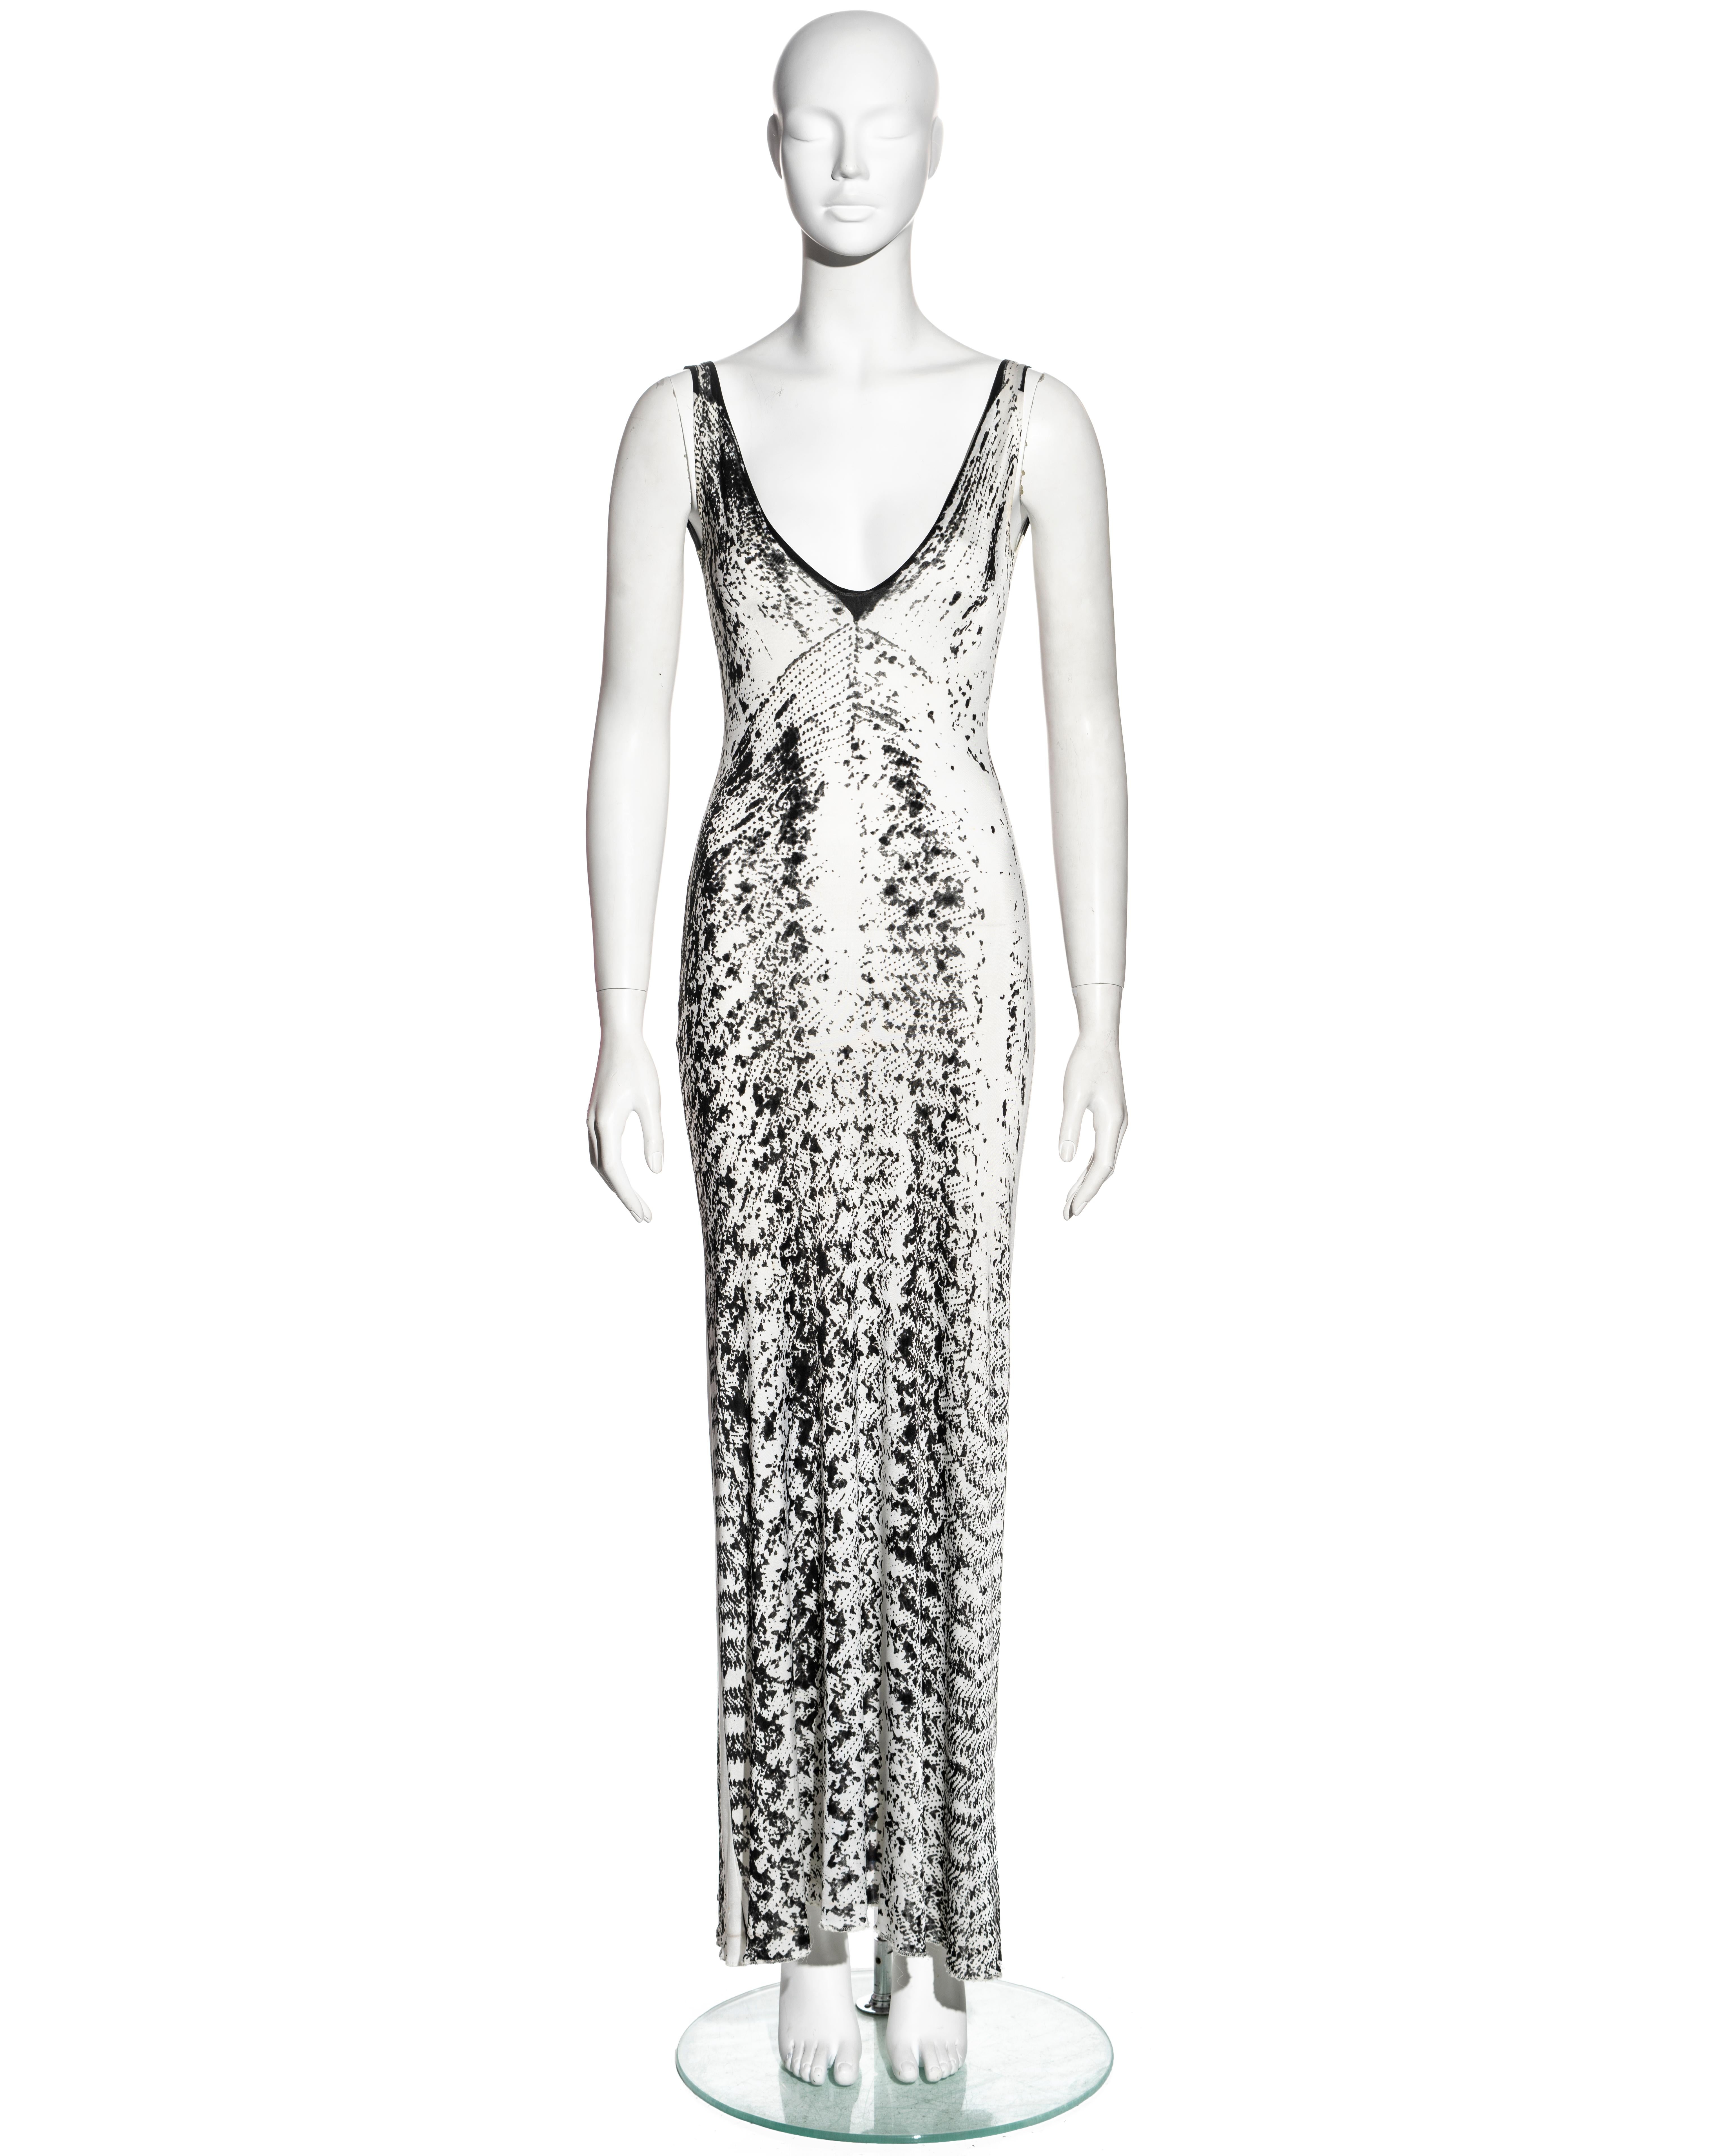 ▪ Martin Margiela maxi dress
▪ Constructed from rayon jersey 
▪ Print features a black and white trompe l’oeil scanned image of a sequin dress; a reference from the ss 1996 collection
▪ Deep v-neck 
▪ Size Small 
▪ Spring-Summer 1999

All